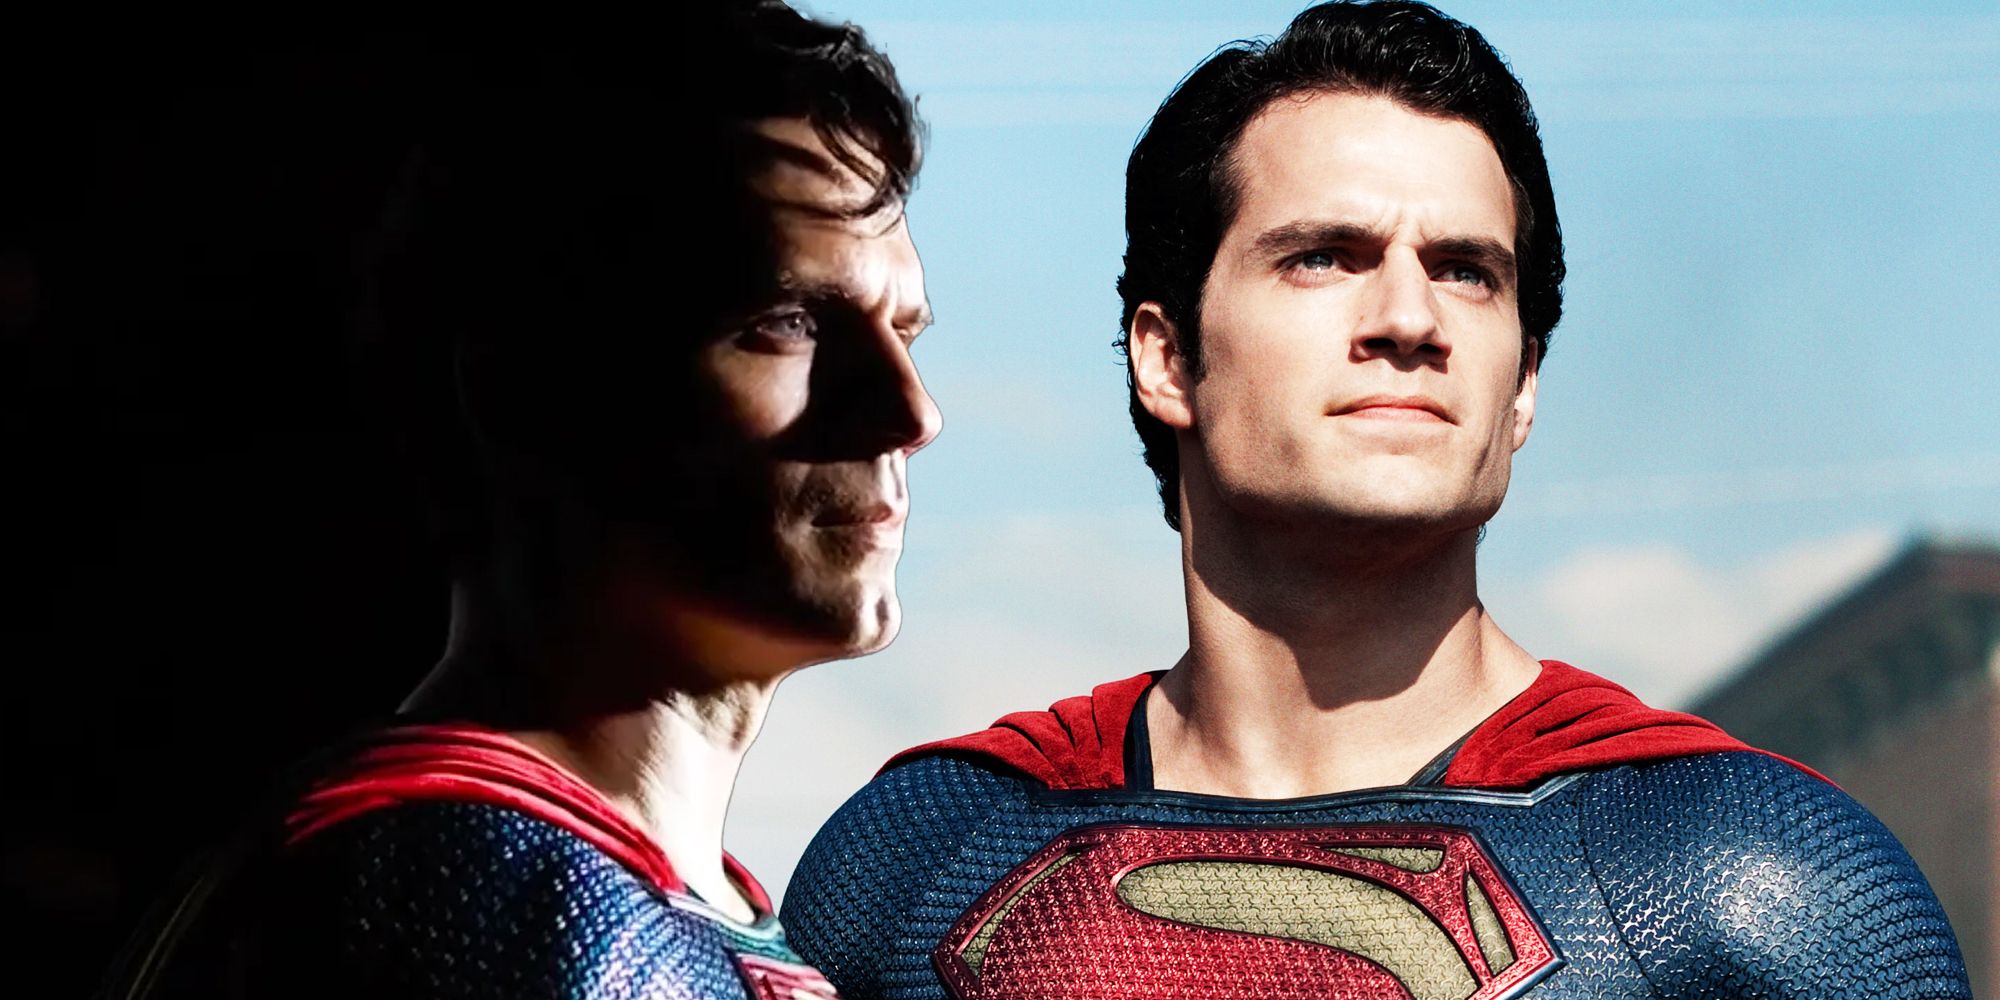 Henry Cavill's return as Superman and Man of Steel